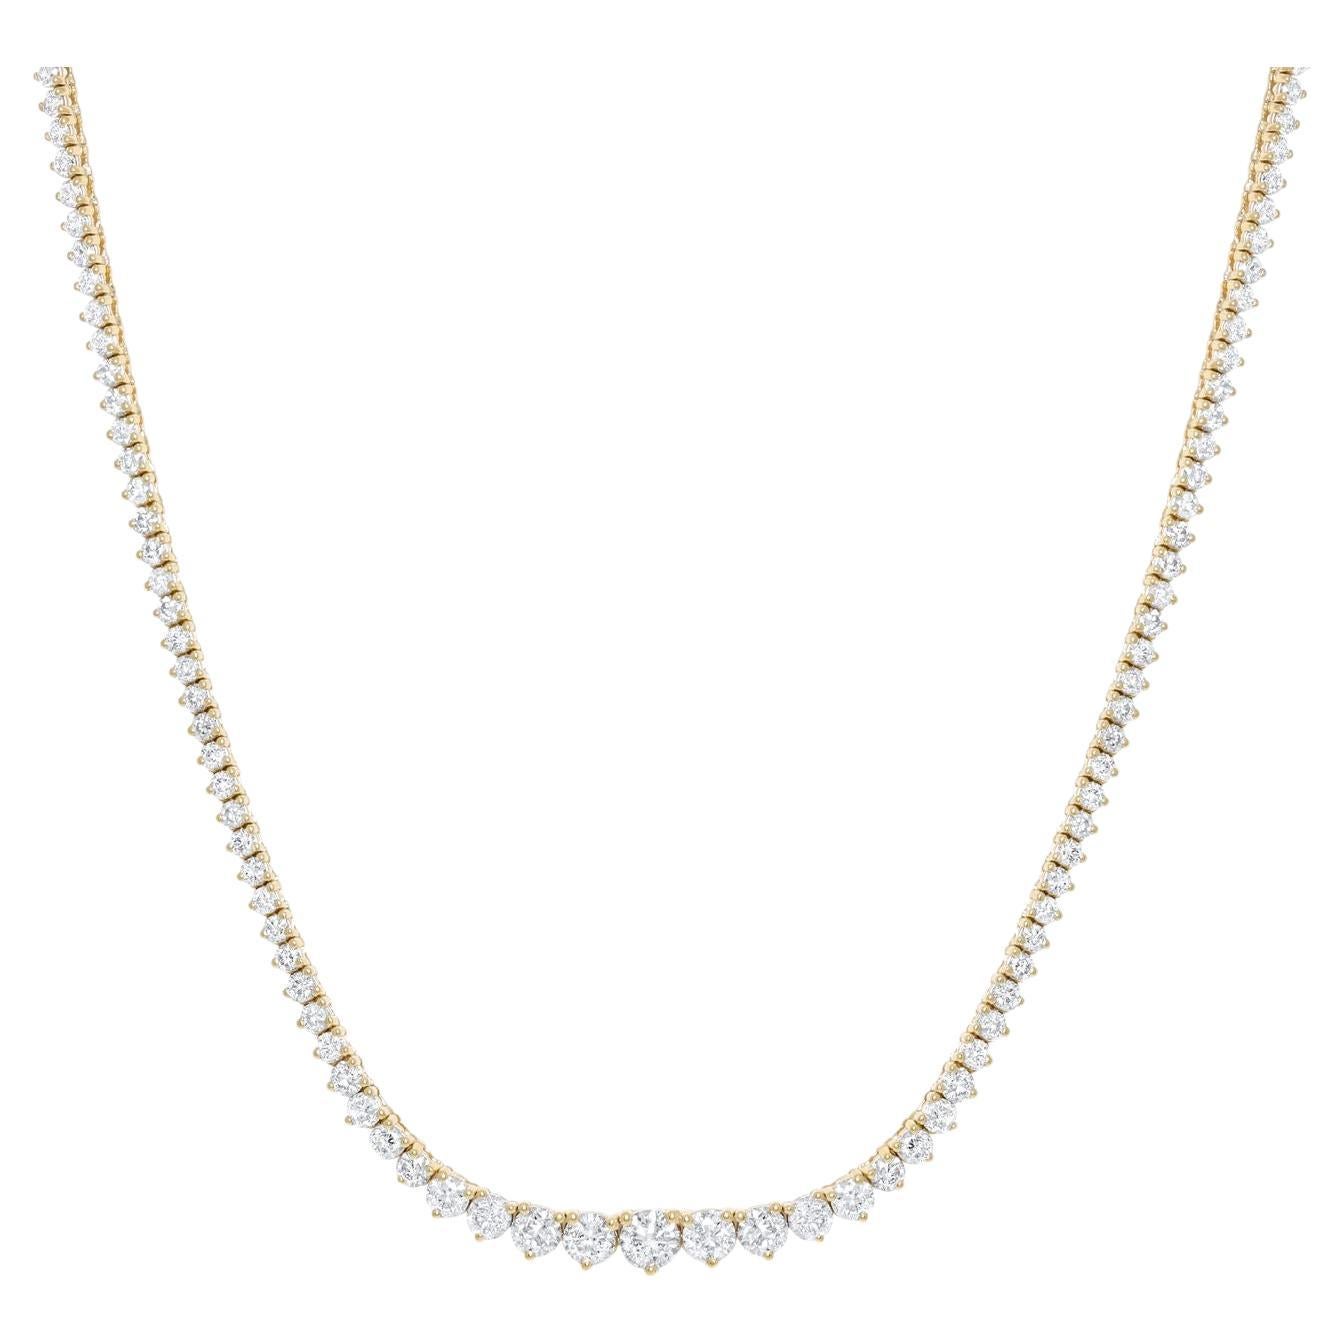 Diana M. 14kt Yellow Gold Graduated Reviera Tennis Necklace Featuring 10.00 cts  For Sale